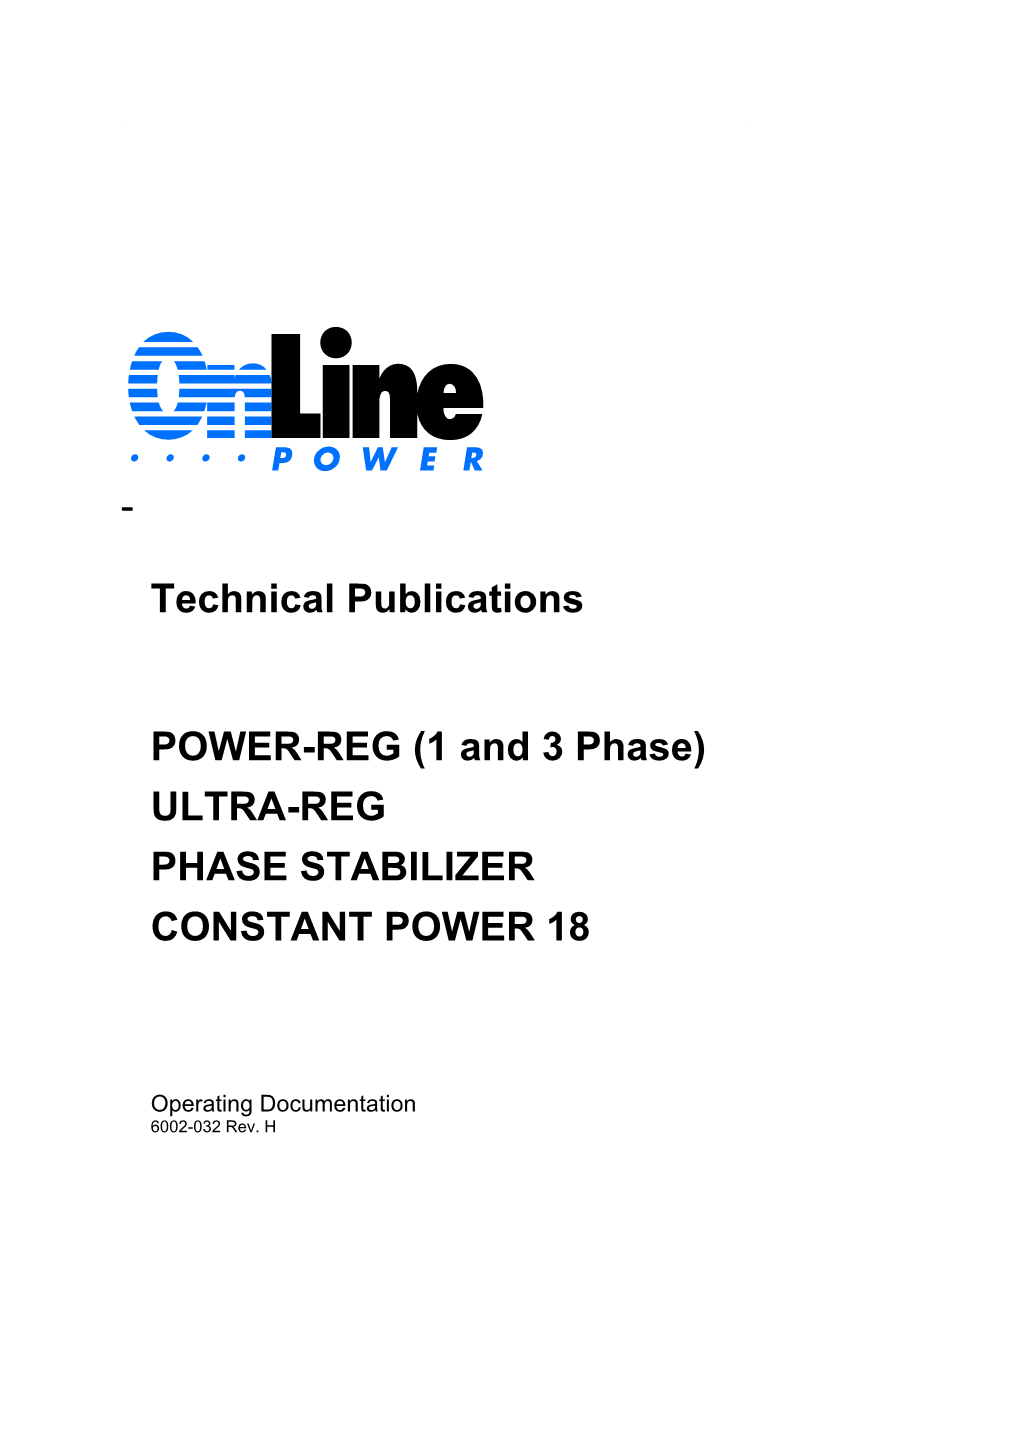 Ultra-Reg Phase Stabilizer Constant Power 18